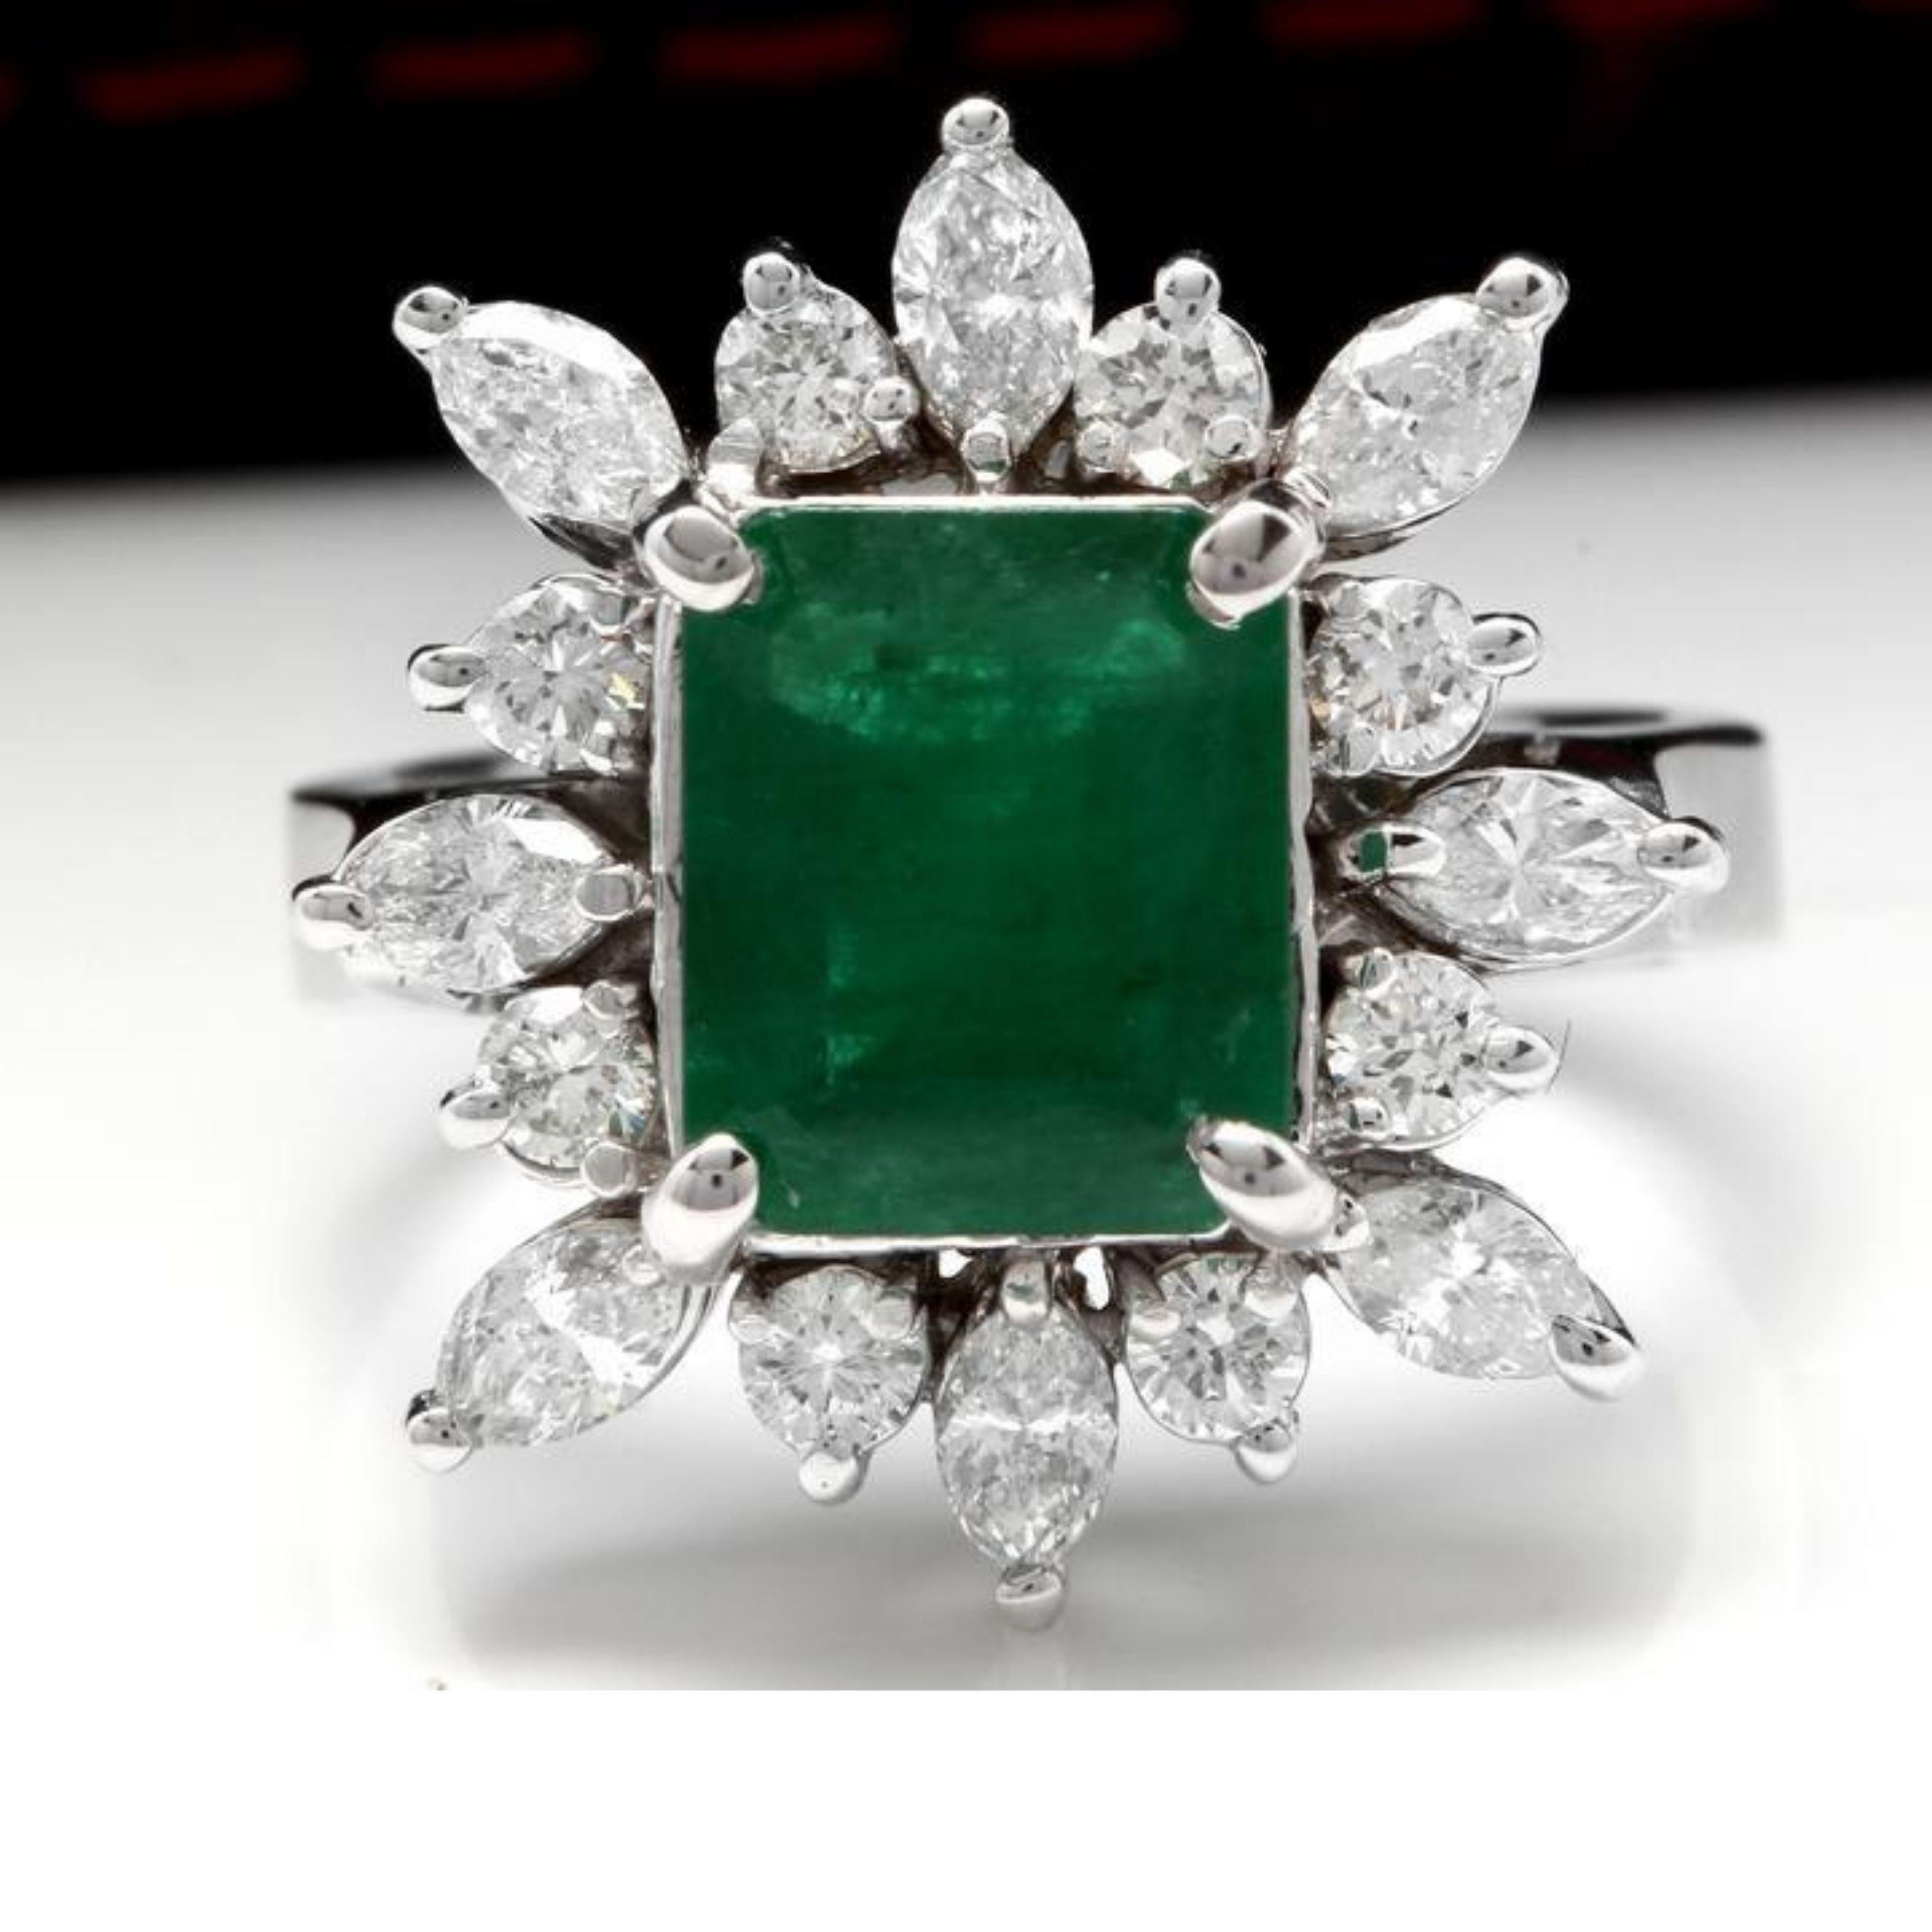 4.06 Carats Natural Emerald and Diamond 14K Solid White Gold Ring

Total Natural Green Emerald Weight is: Approx. 2.56 Carats (transparent)

Emerald Measures: Approx. 9.11 x 7.66mm

Emerald Treatment: Oiling

Natural Round & Marquise Diamonds